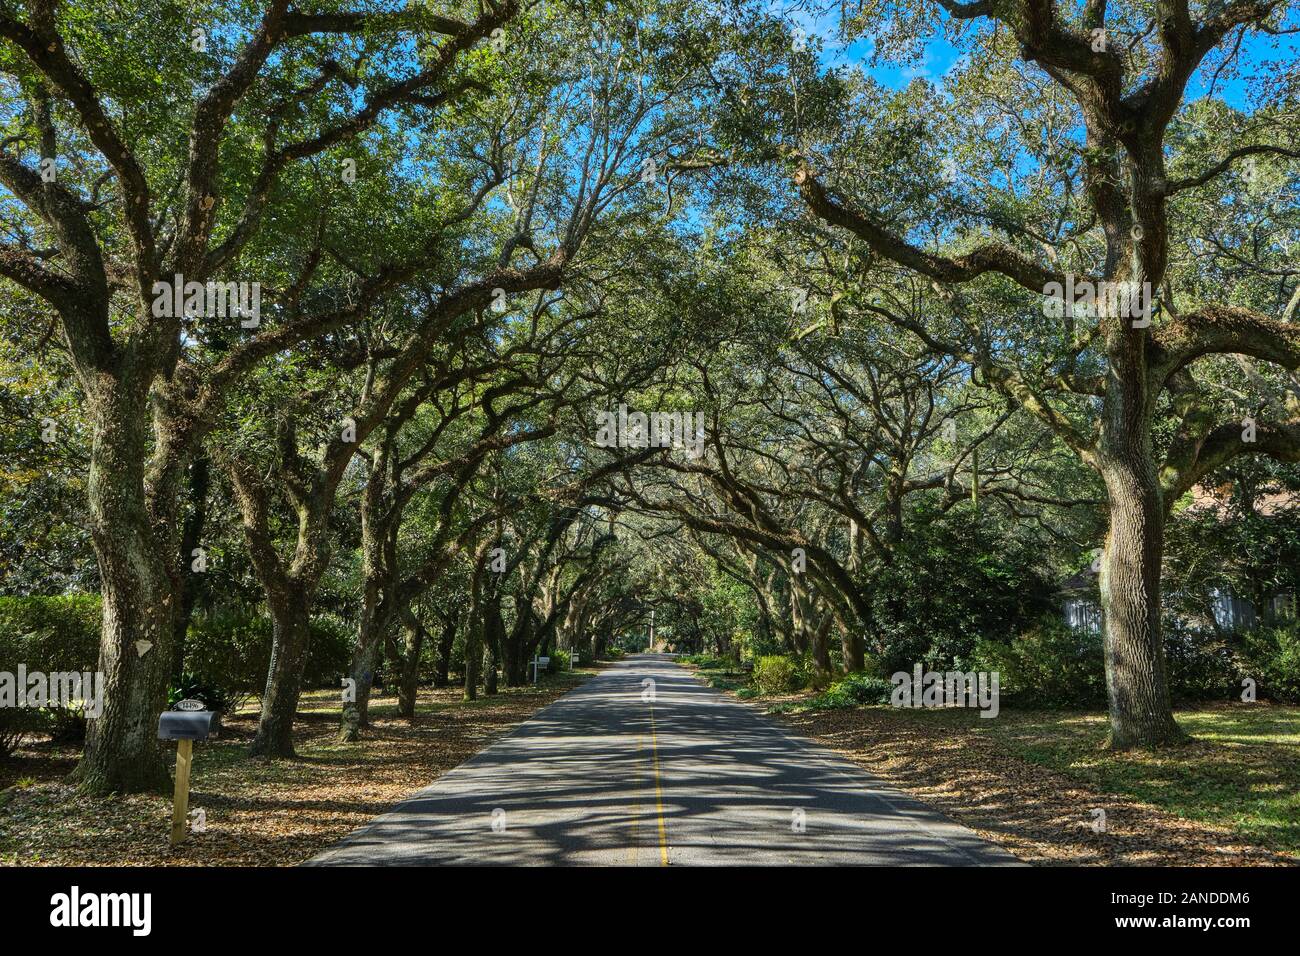 Small country lane or road lined with towering live oak trees in rural Magnolia Springs Alabama, USA. Stock Photo